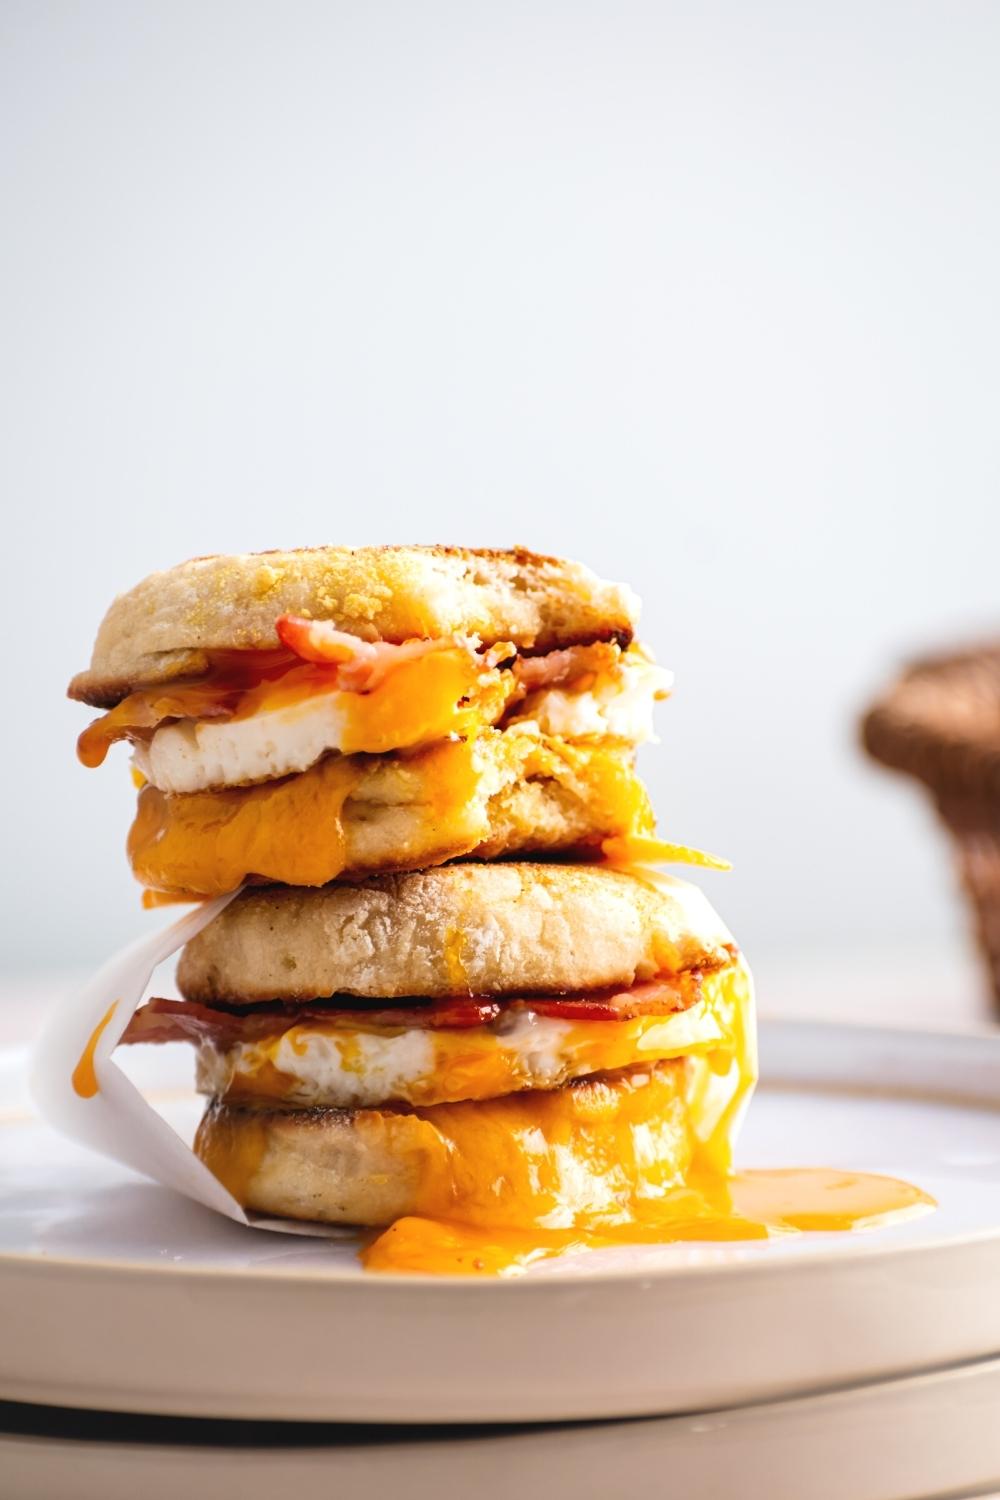 Two egg mcmuffins stacked on top of one another on a white plate.